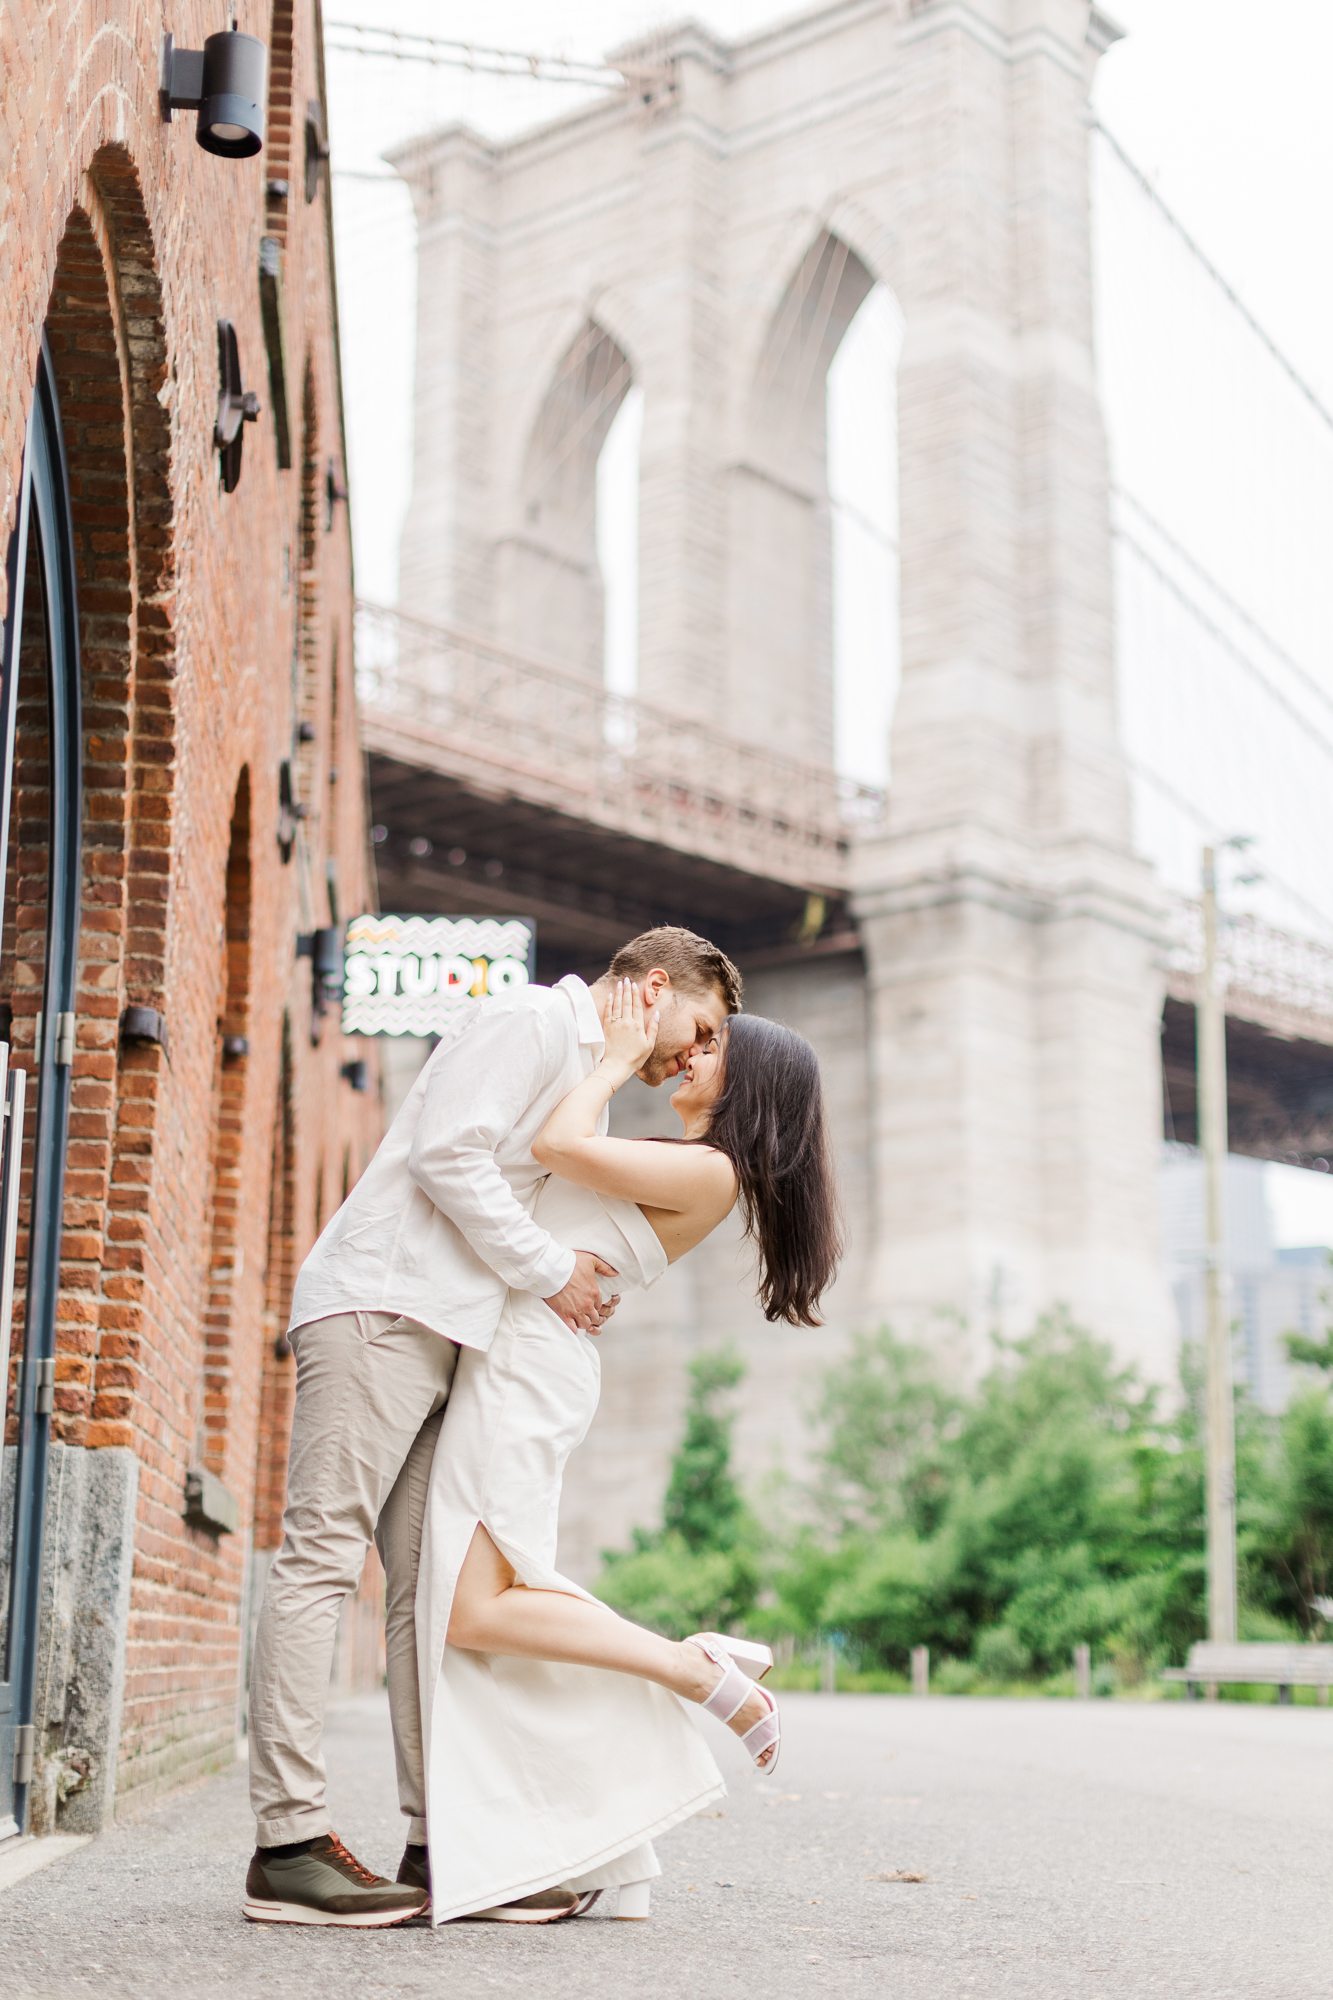 Gorgeous Pose Ideas for your Engagement Session